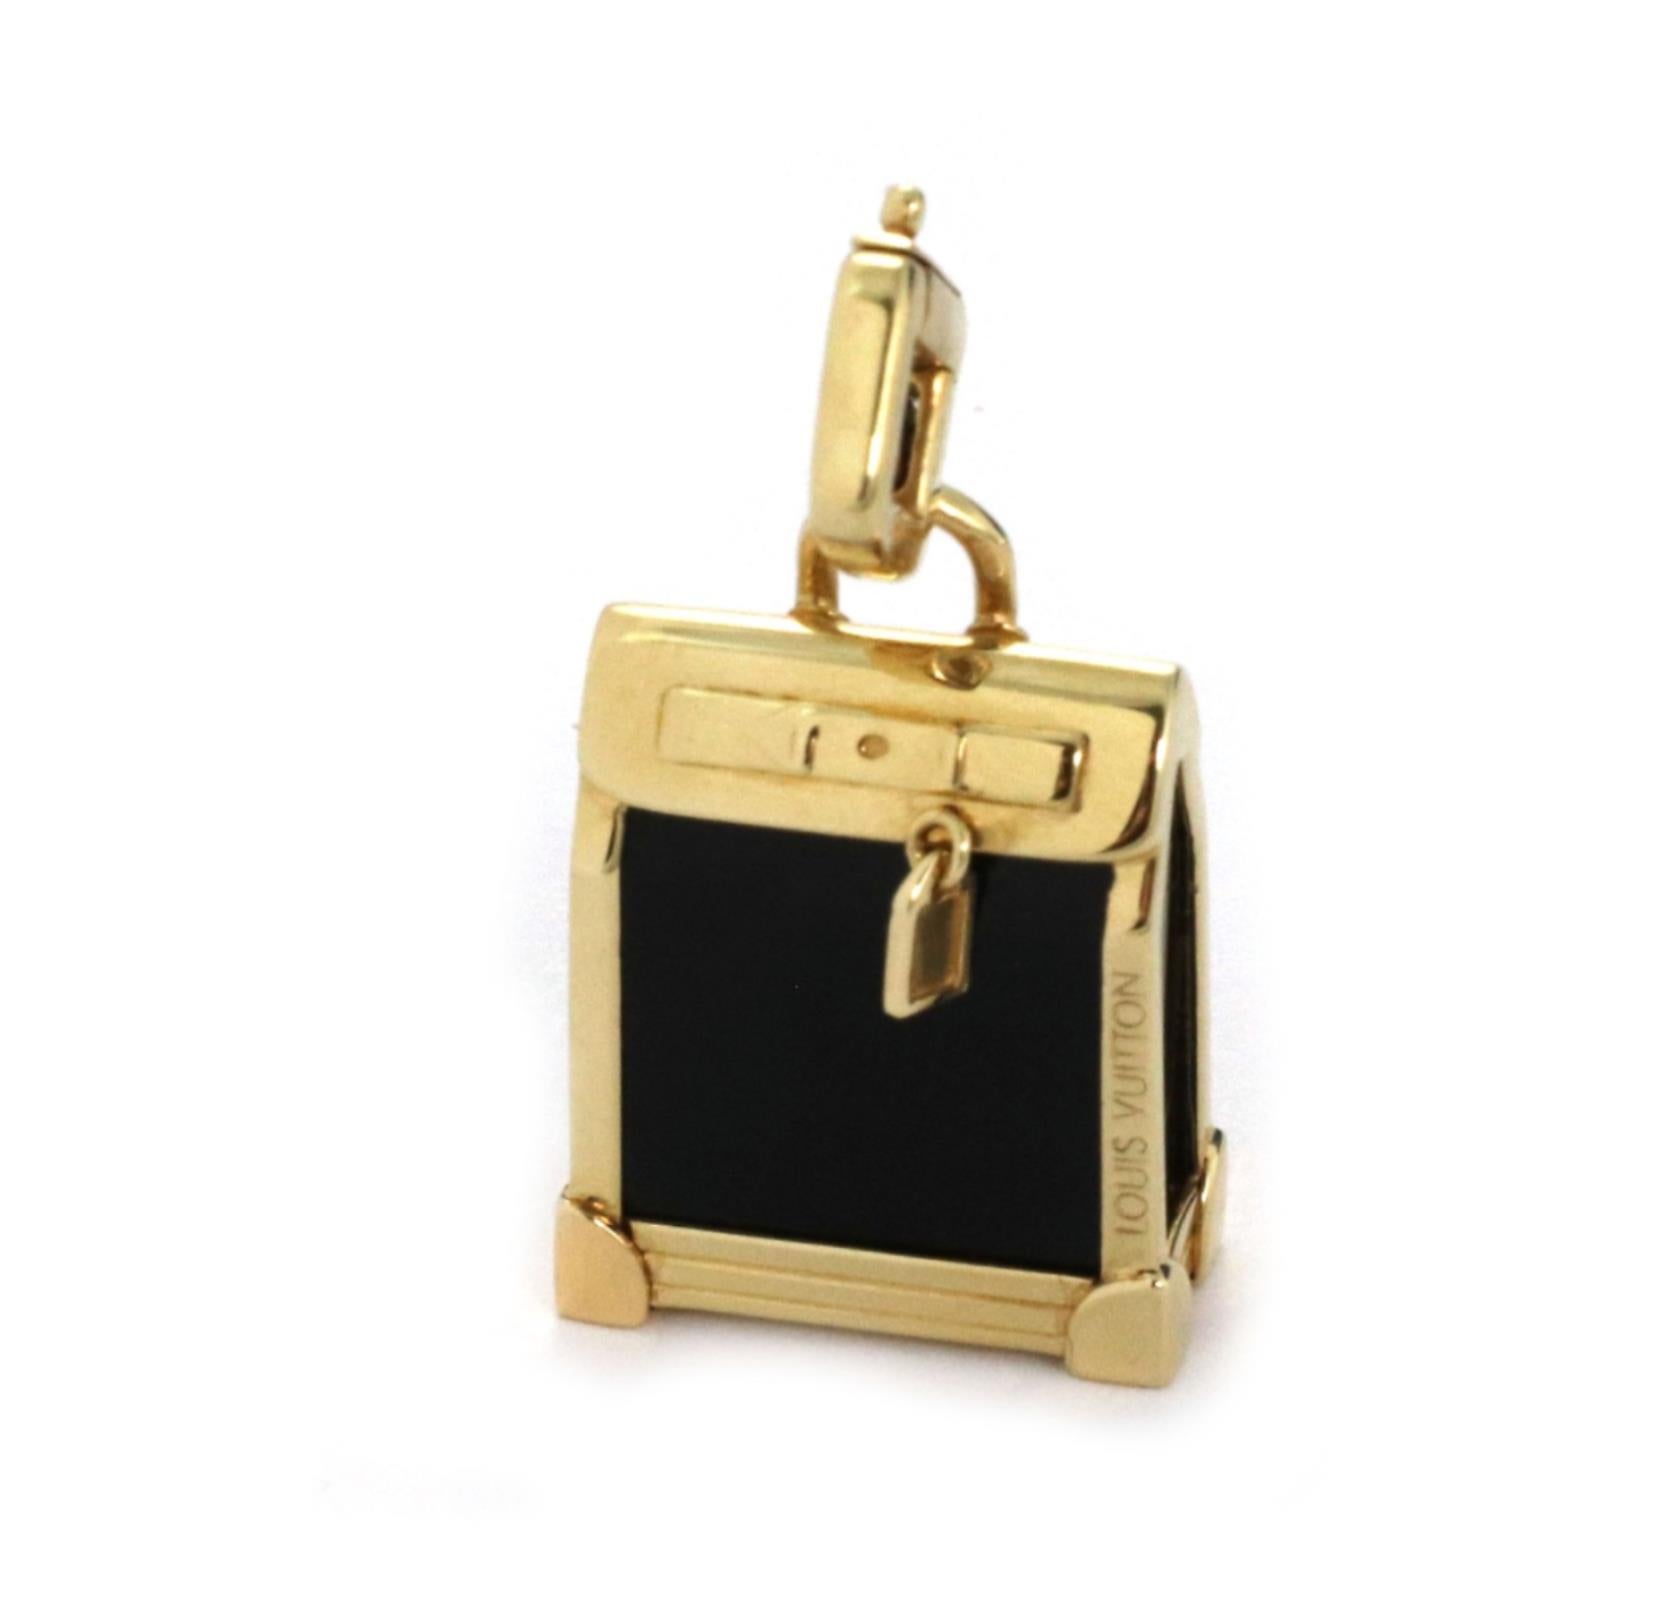 This is an authentic pendant of charm by Louis Vuitton from the Steamer collection. It is crafted from 18k yellow gold with a polished finish. It features a wonder Steamer charm in onyx and yellow gold. The romance of steamer travel is remembered in